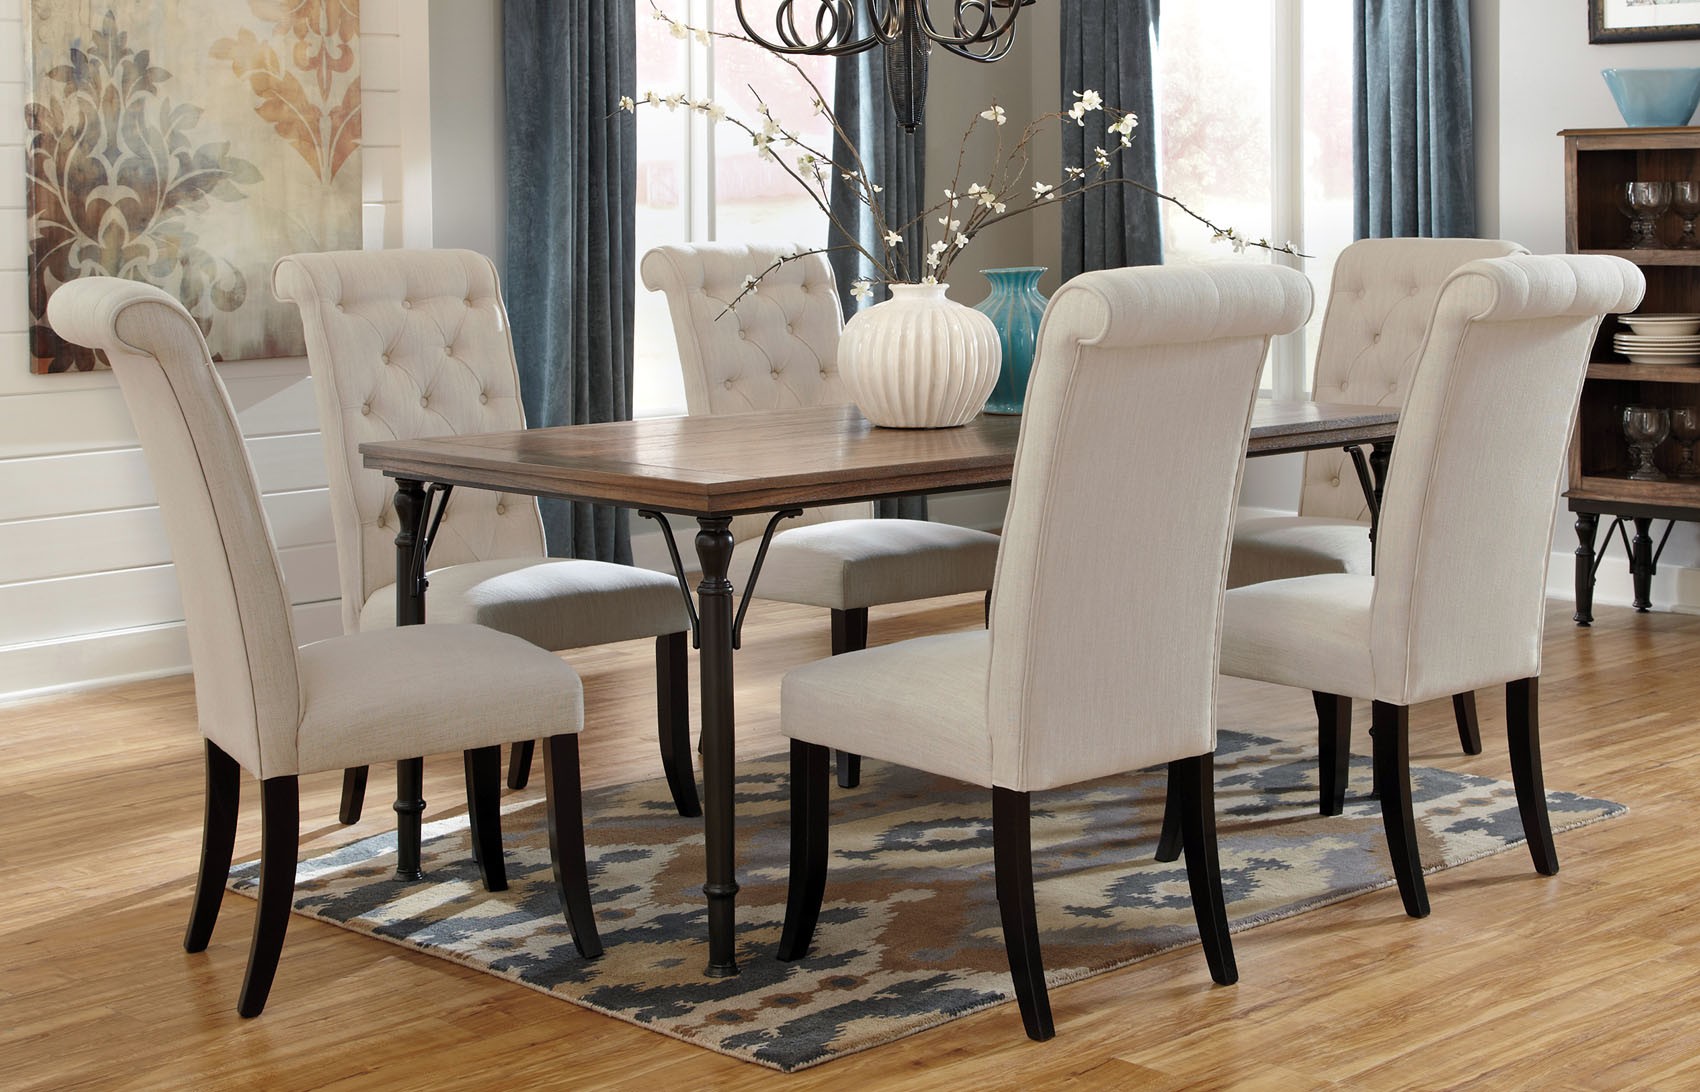 Tufted Parsons Dining Room Chairs In Ivory